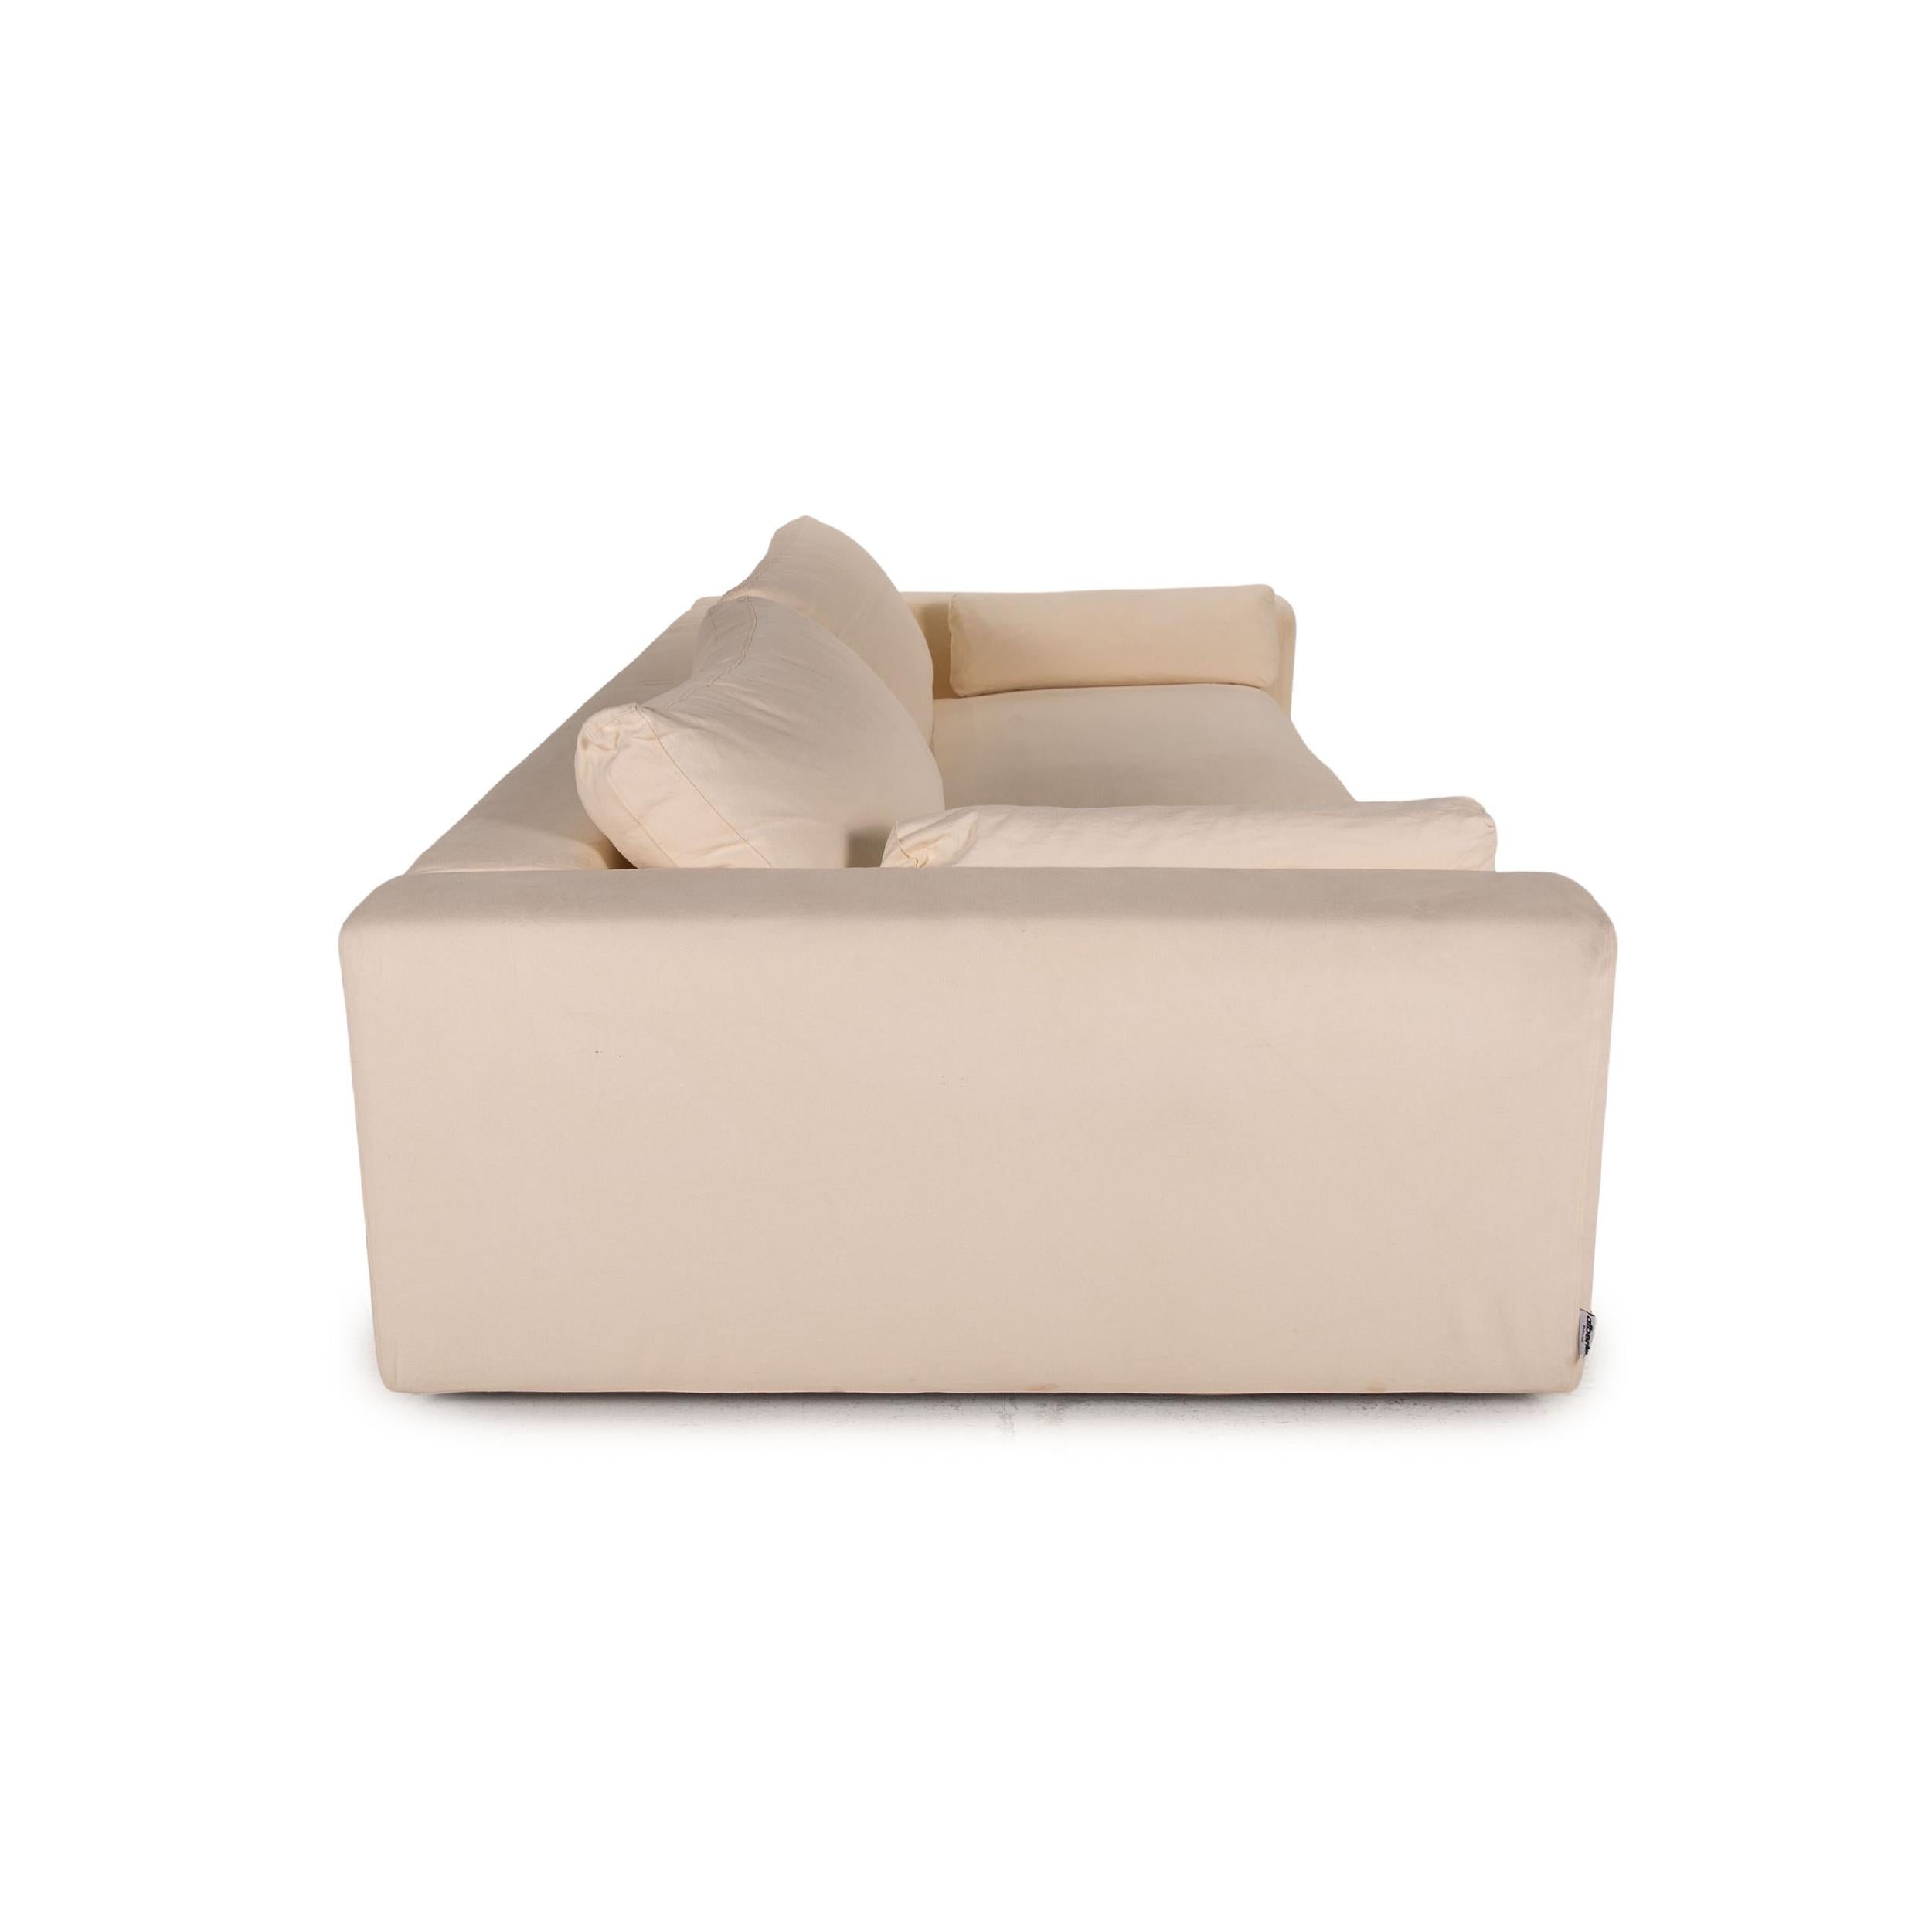 Contemporary Who's Perfect Summer Fabric Sofa Cream Four Seater Couch